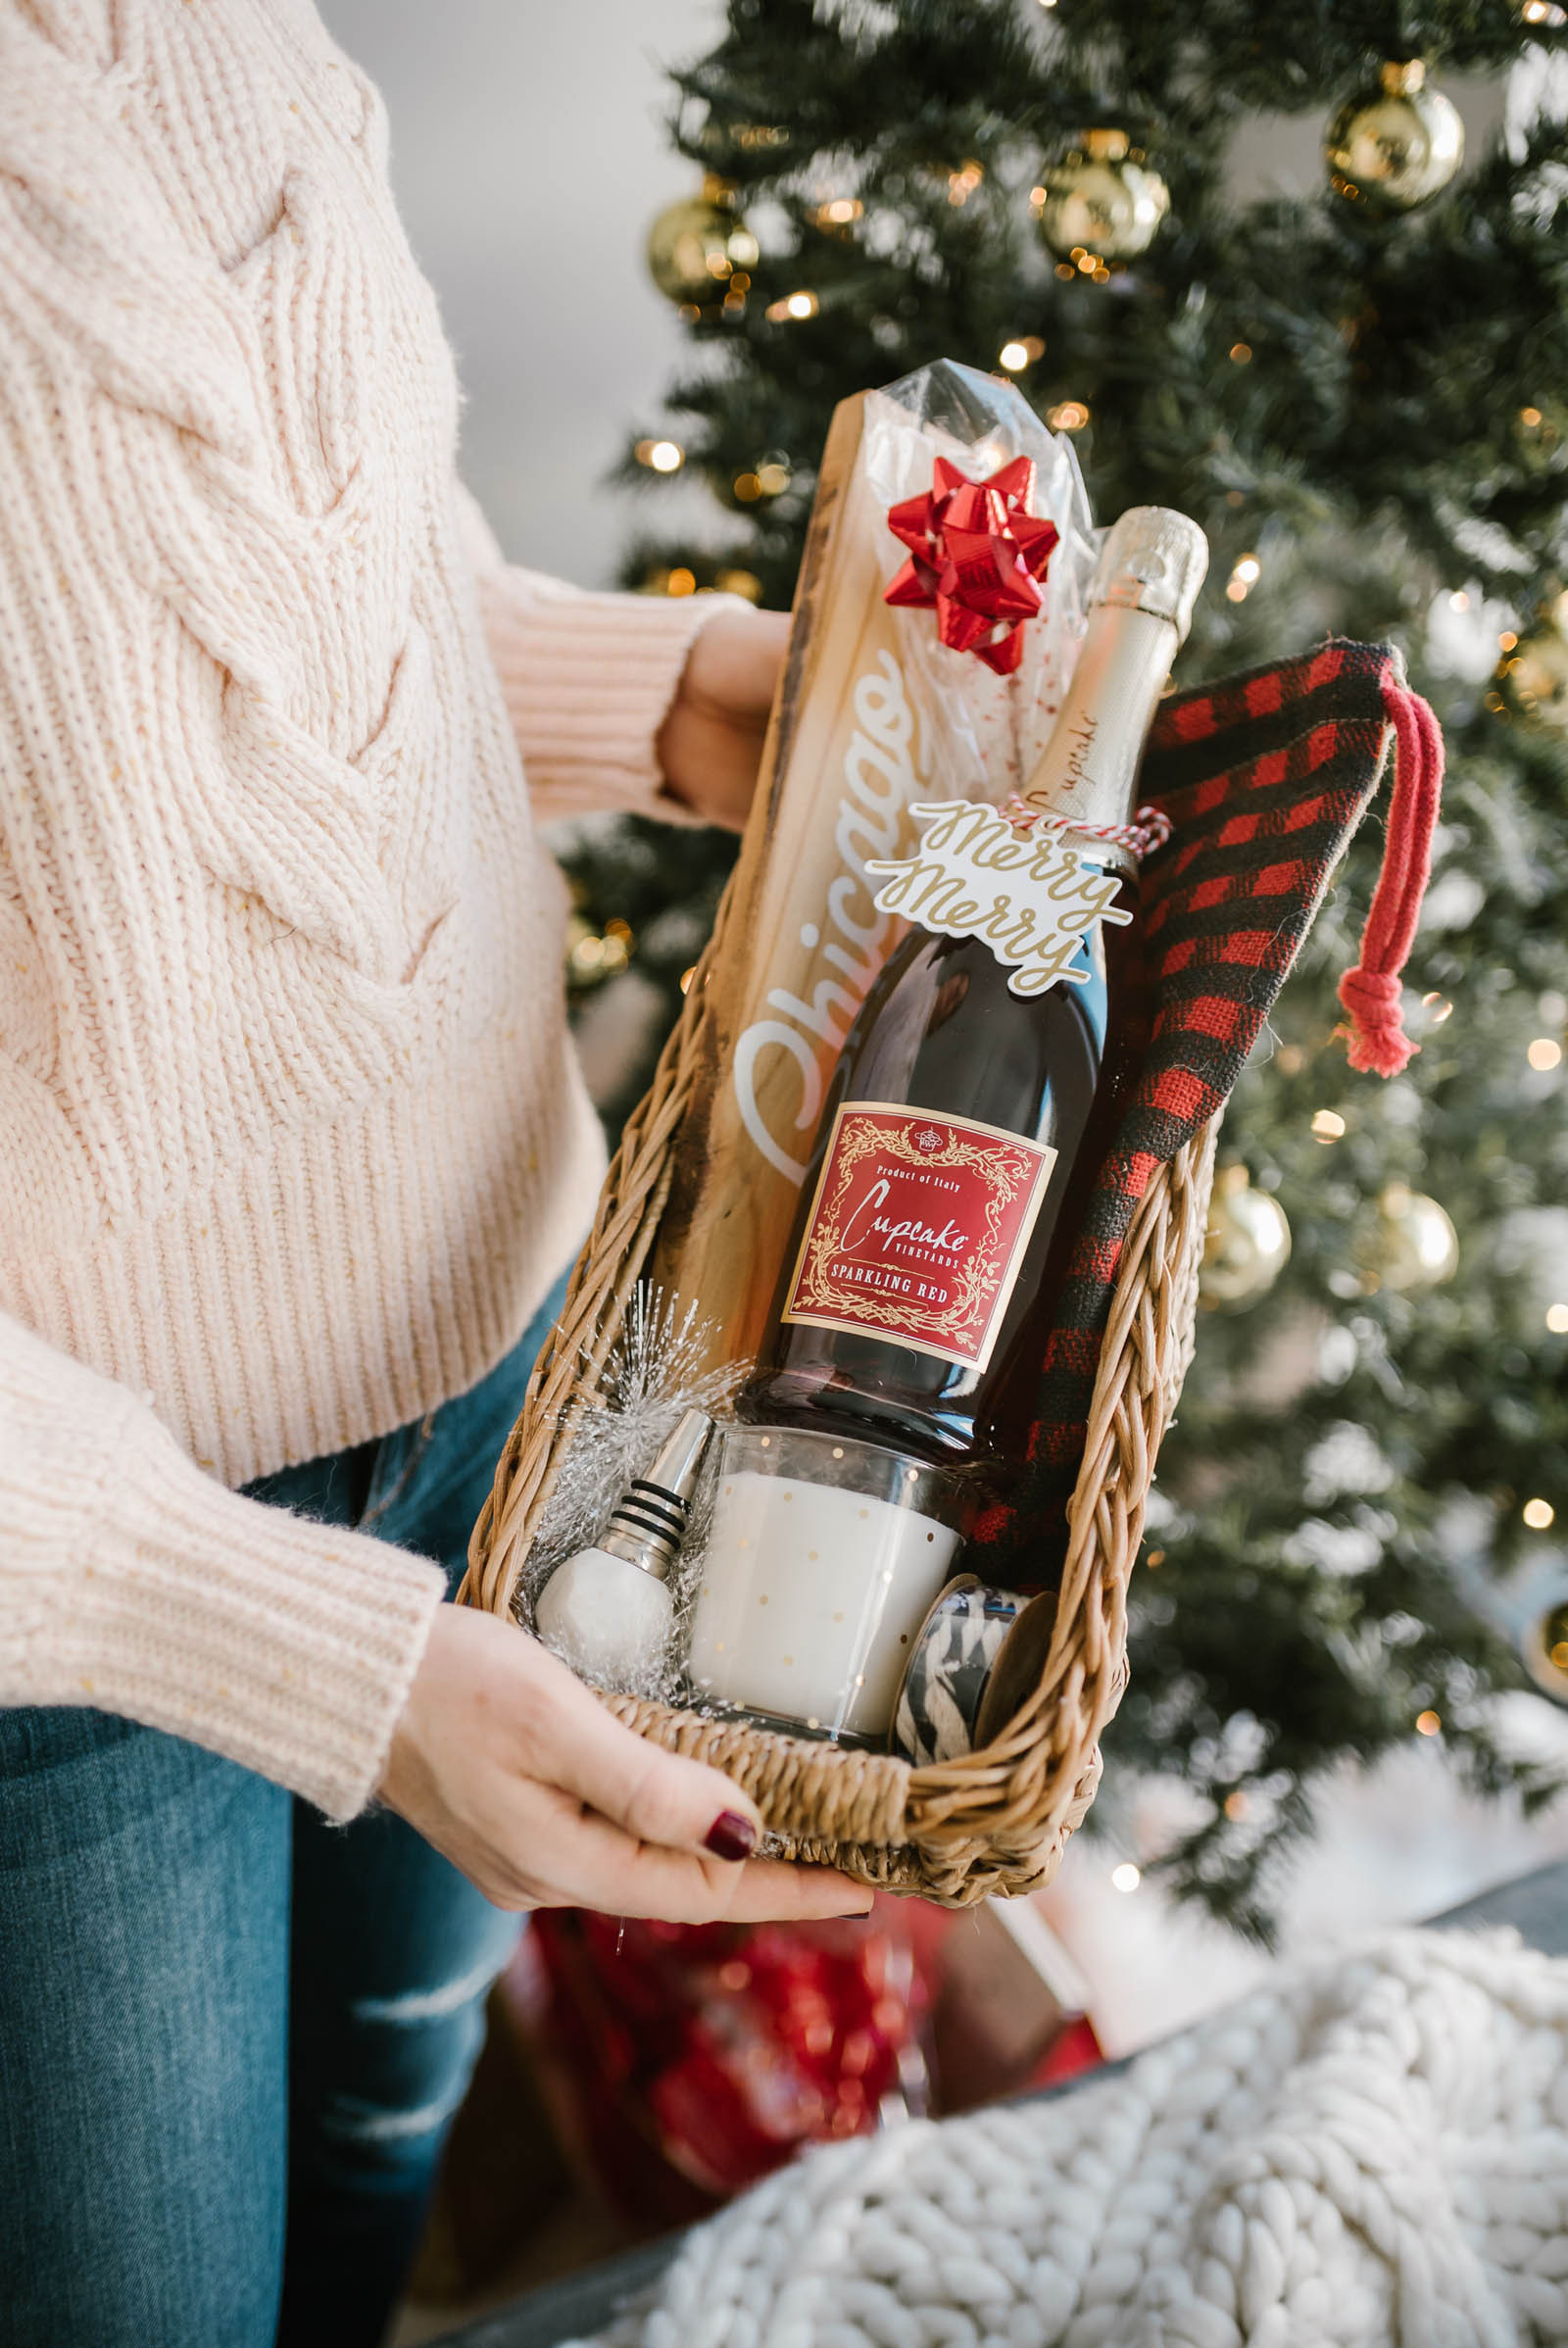 Small Holiday Gift Basket Ideas
 Last Minute Holiday Idea Easy Homemade Gift Baskets